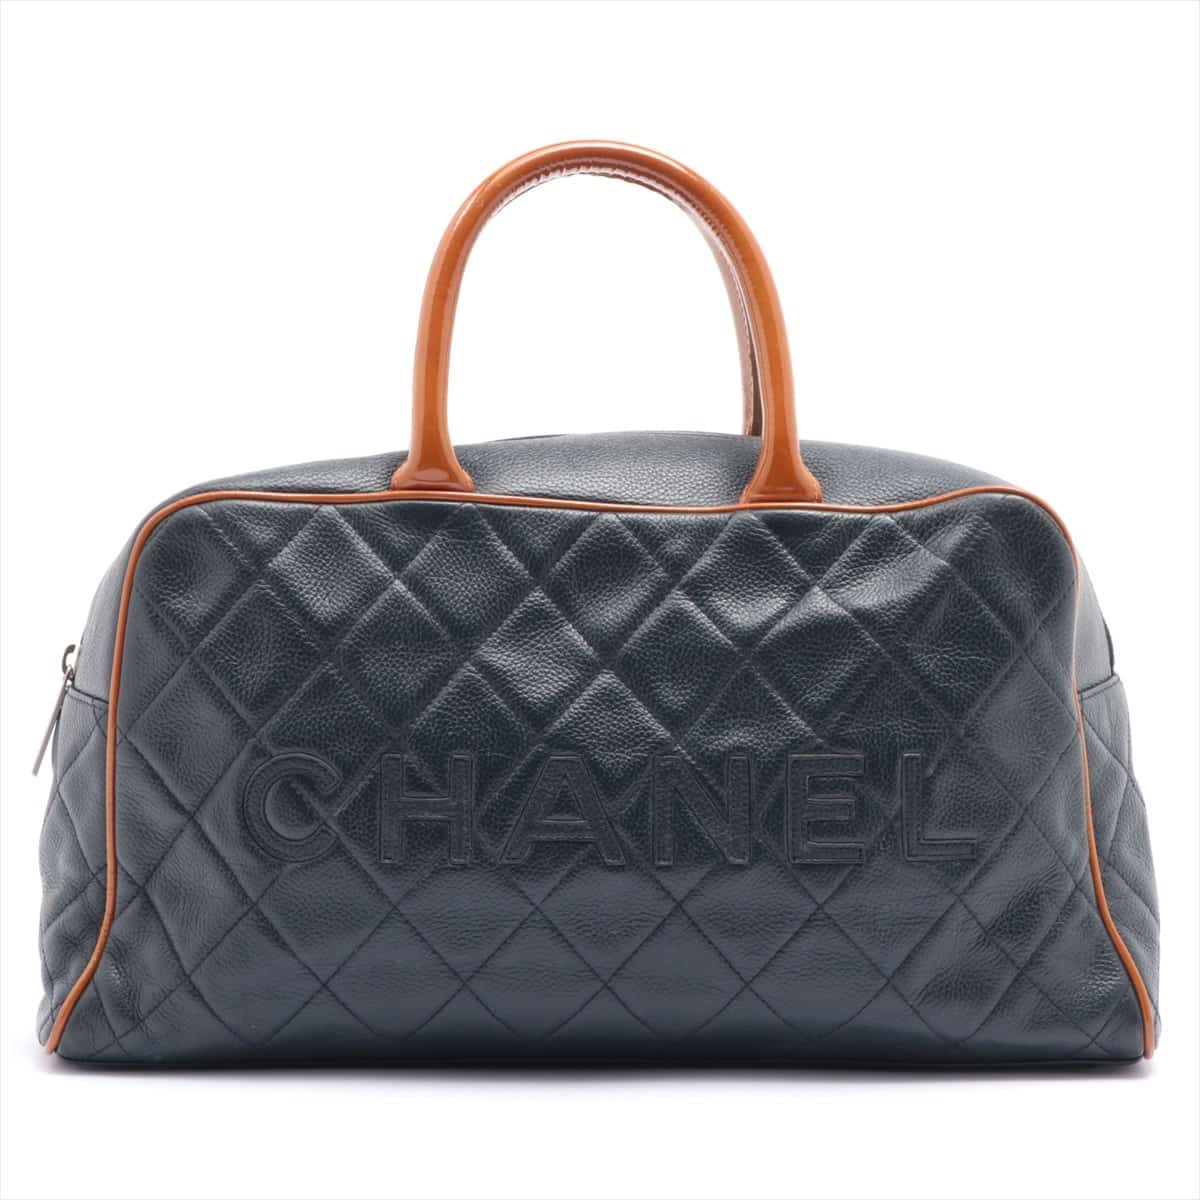 Chanel Matelasse Leather & patent Boston bag Navy blue Silver Metal fittings 6XXXXXX